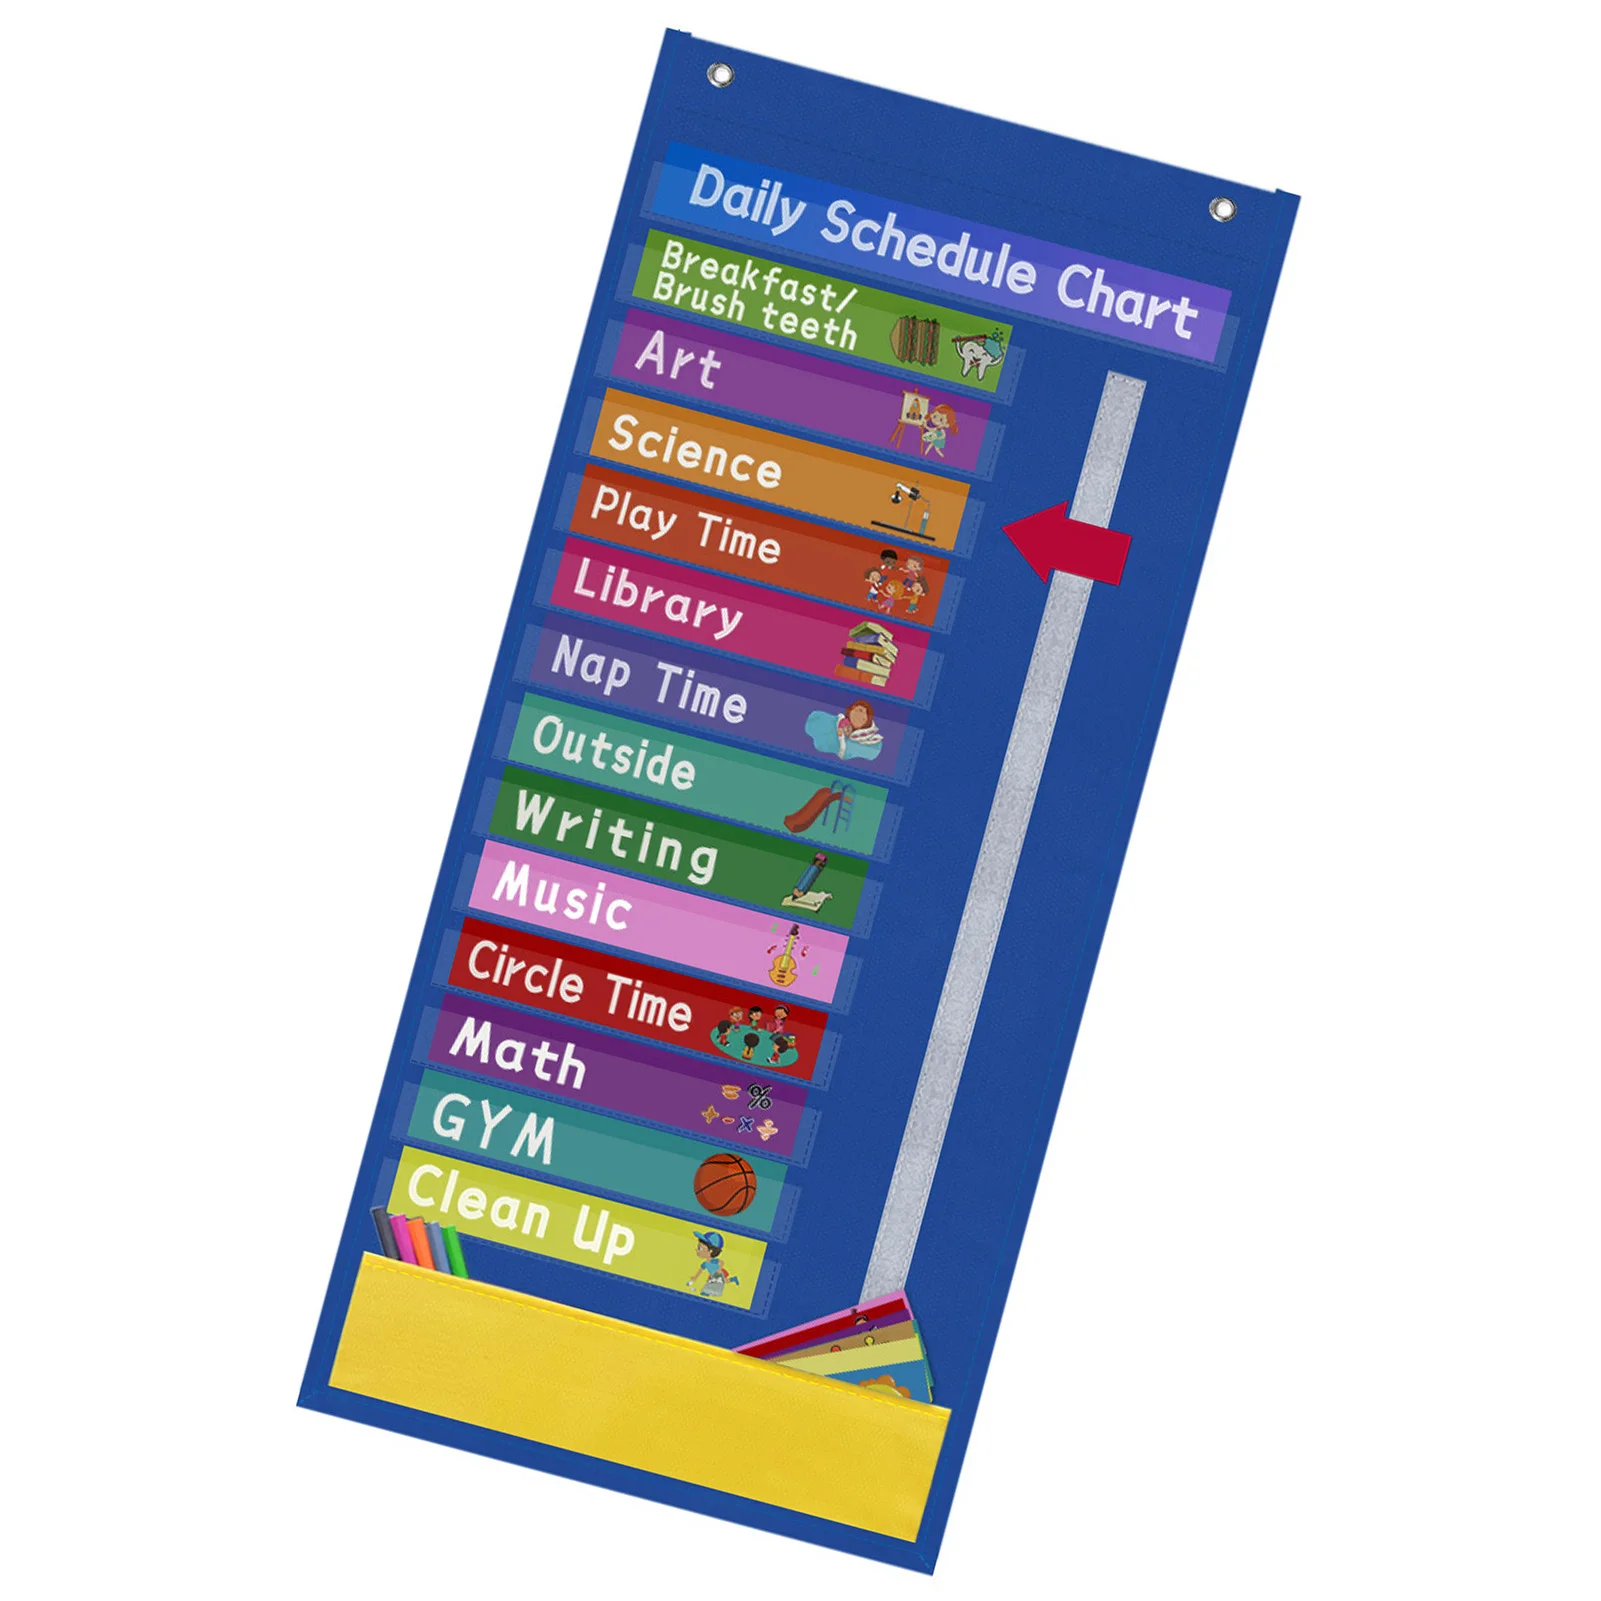 Daily Schedule Chart Classroom Schedule With 31 Cards 131 Pockets Weekly Schedule Chart With 10 Blank Double-Sided Reusable